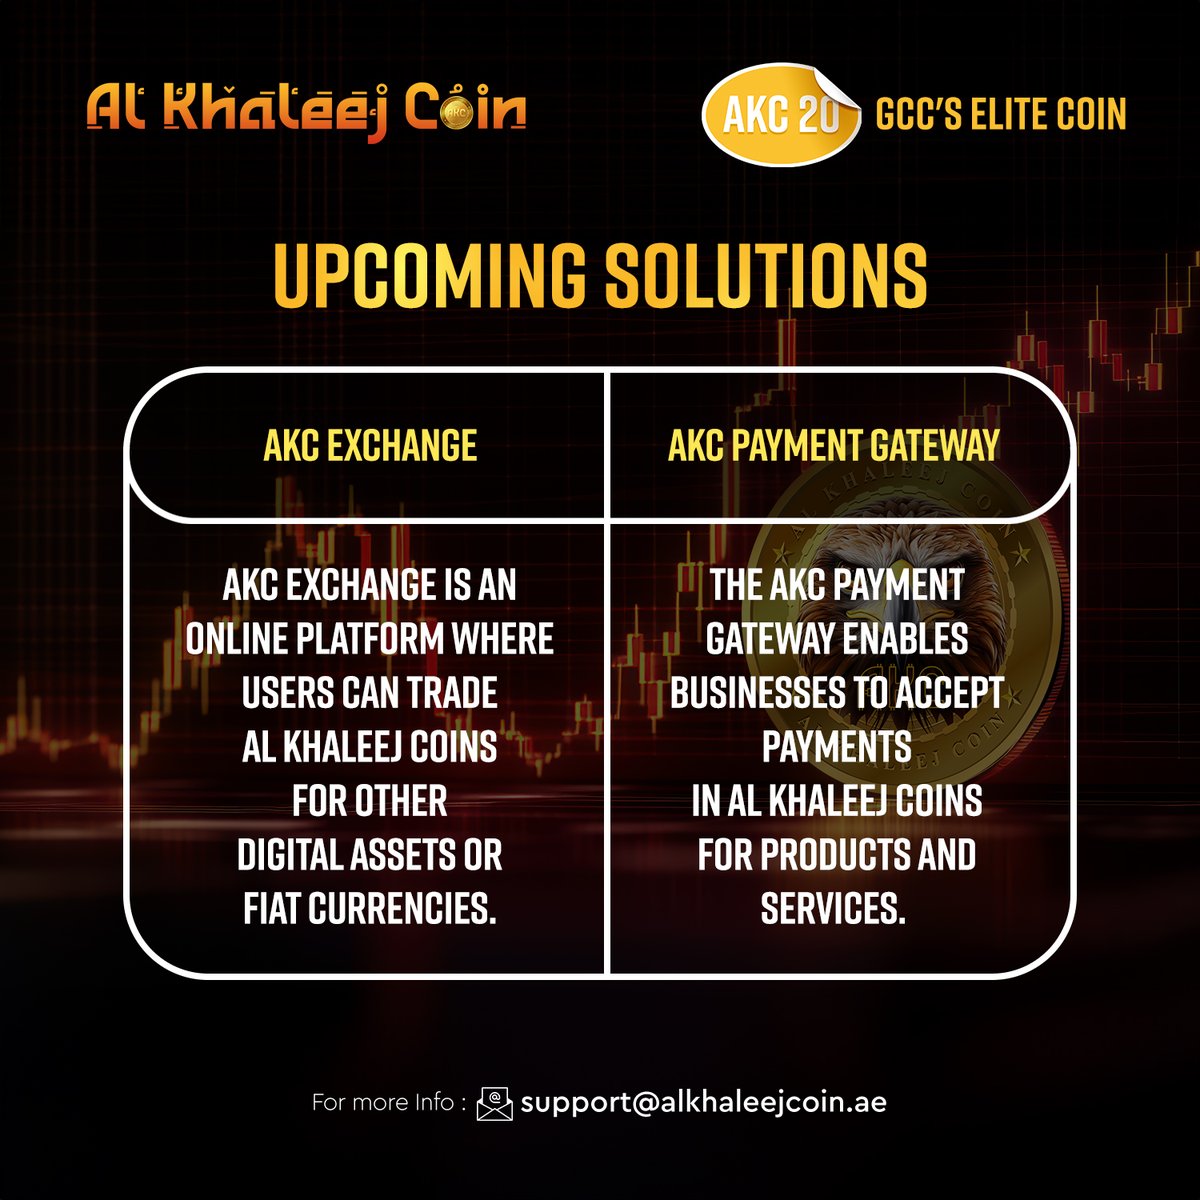 Exciting news! 🚀 Get ready for the launch of AKC Exchange and AKC Payment Gateway – revolutionizing how you trade and transact with Al Khaleej Coins. Stay tuned for more updates! #AKC #Crypto #Innovation #alkhaleejcoin #gcccoin #CoinMarketCap #exchange #elitecoin